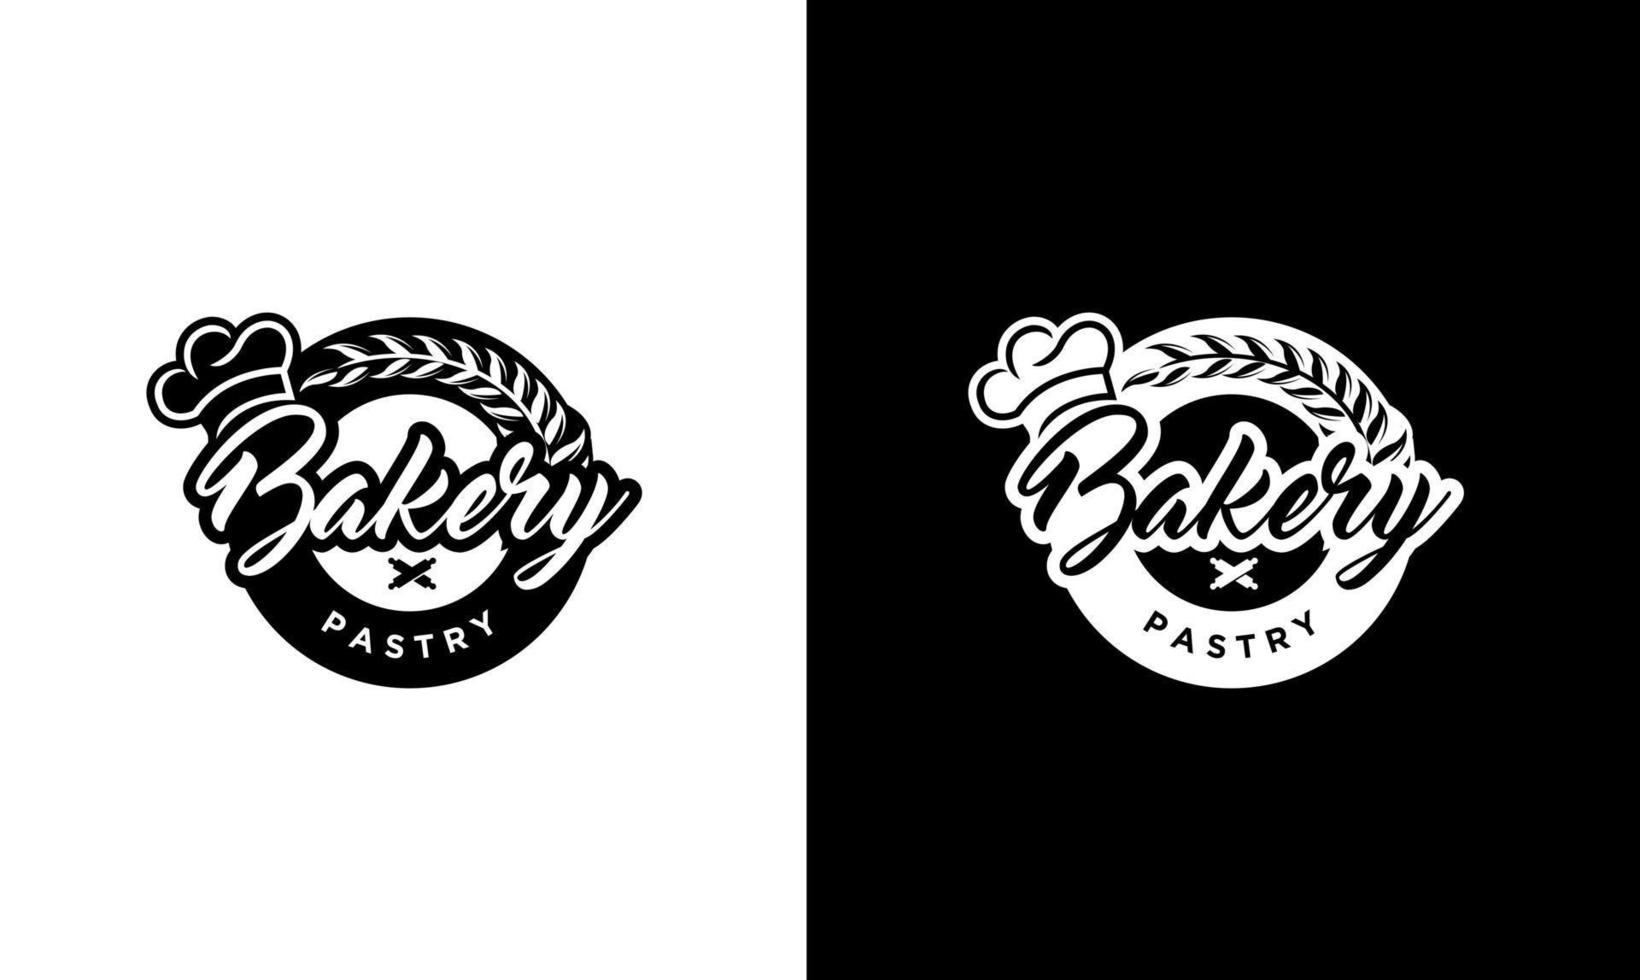 Bakery Vintage Badge And Labels vector